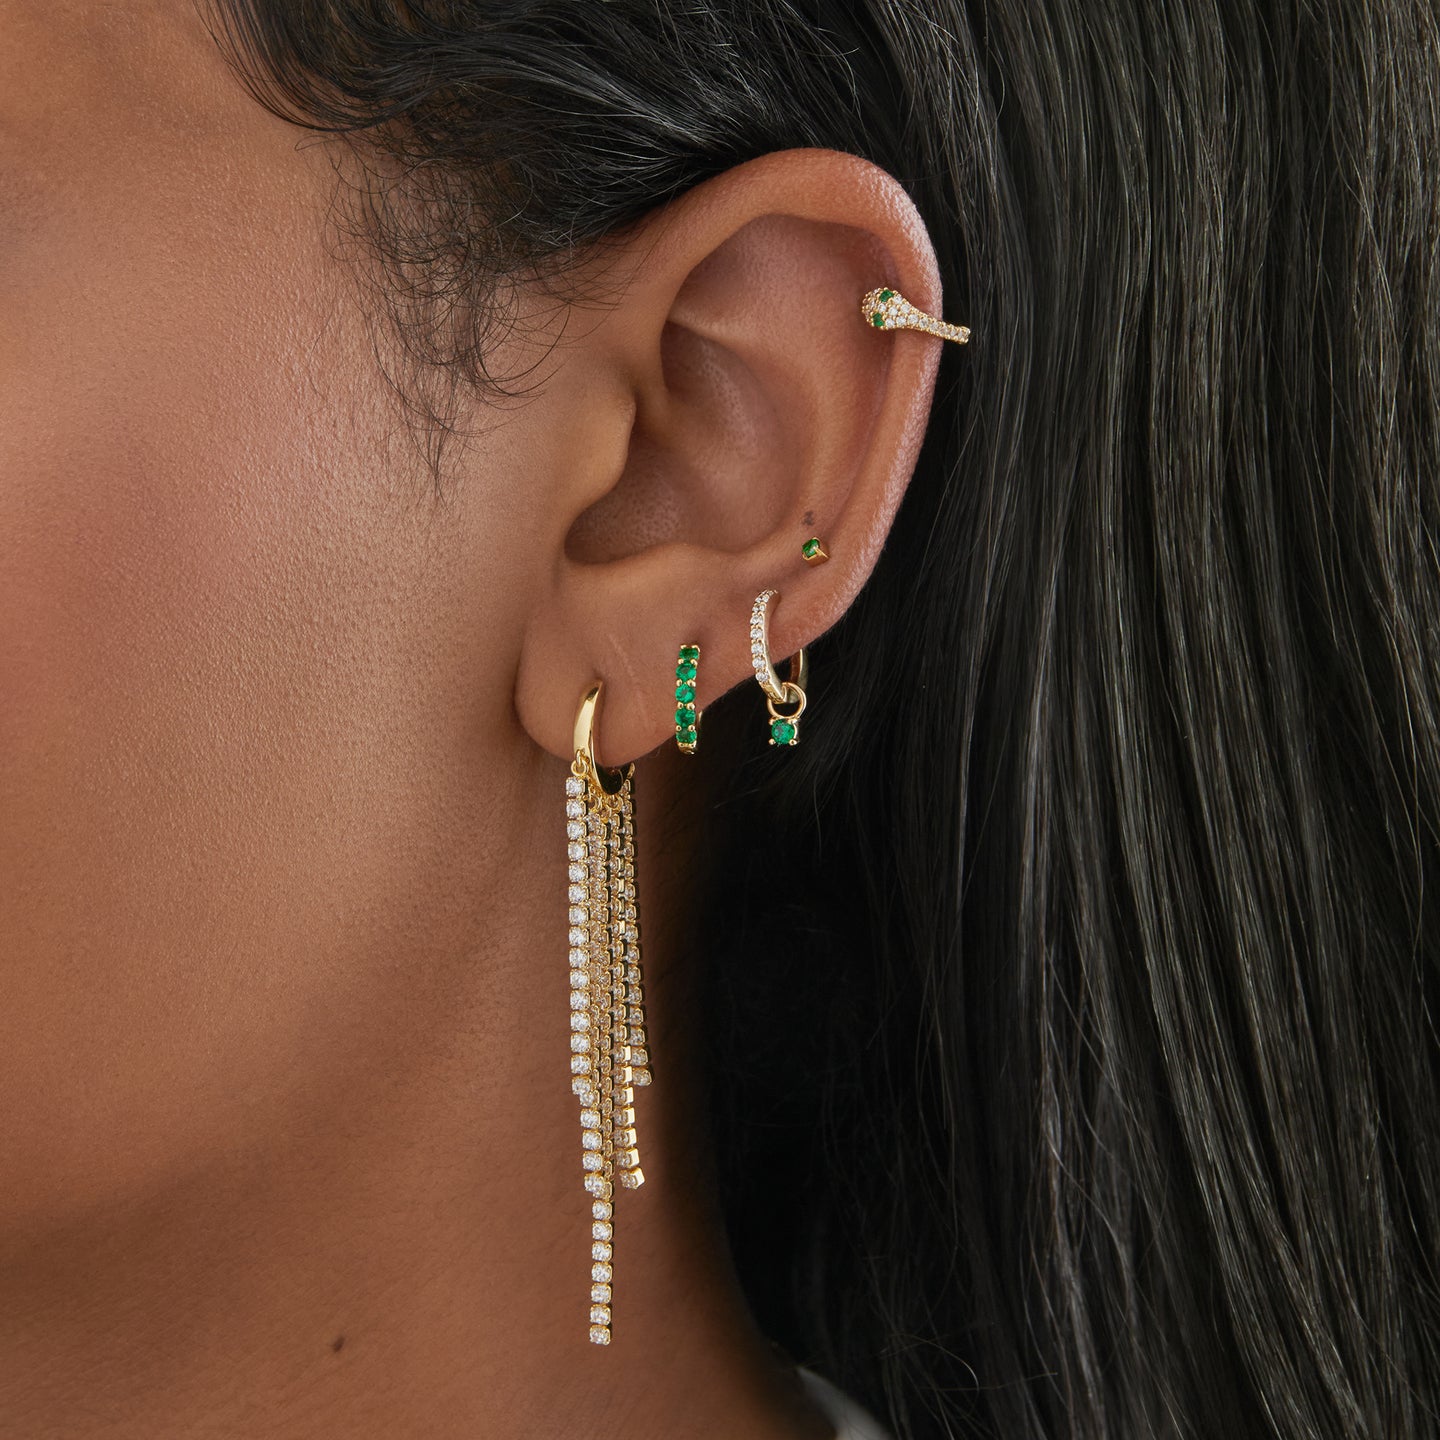 This is an image of a gold huggie that has gold/clear CZ strands dangling from it in a fringed pattern on ear. [hover] color:null|gold/clear